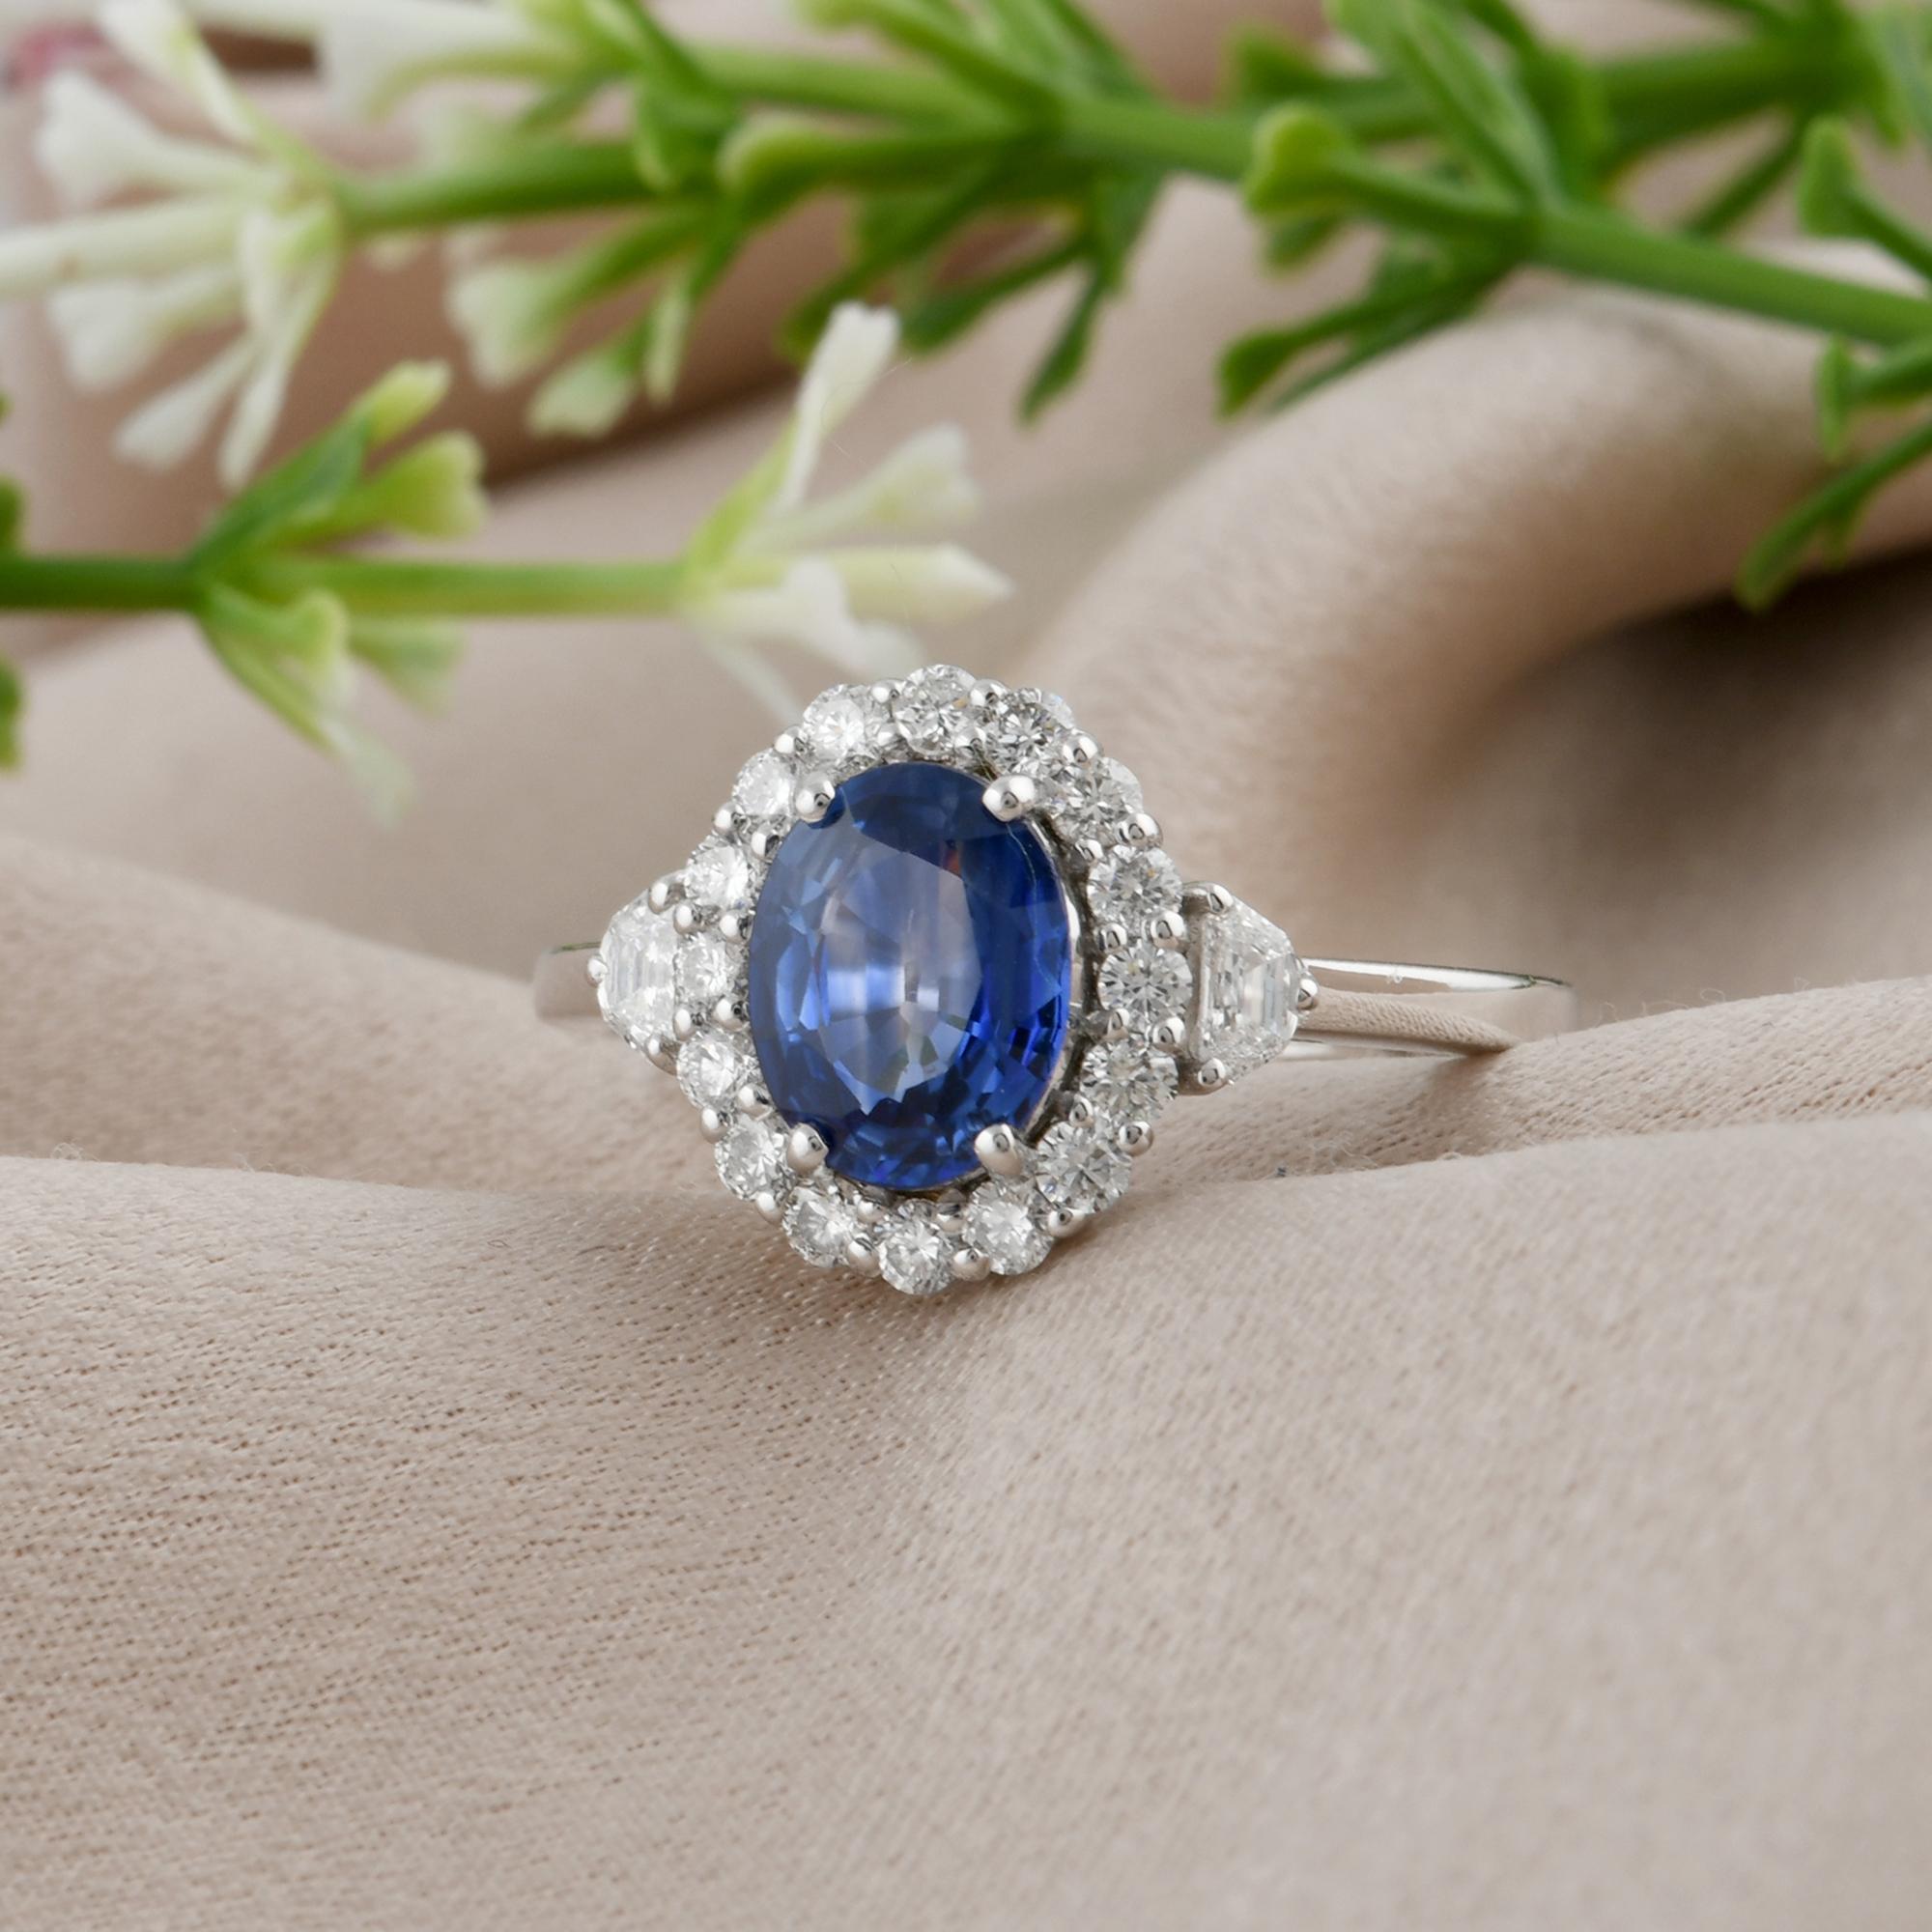 Oval Cut Oval Blue Sapphire Gemstone Cocktail Ring Diamond 18 Karat White Gold Jewelry For Sale